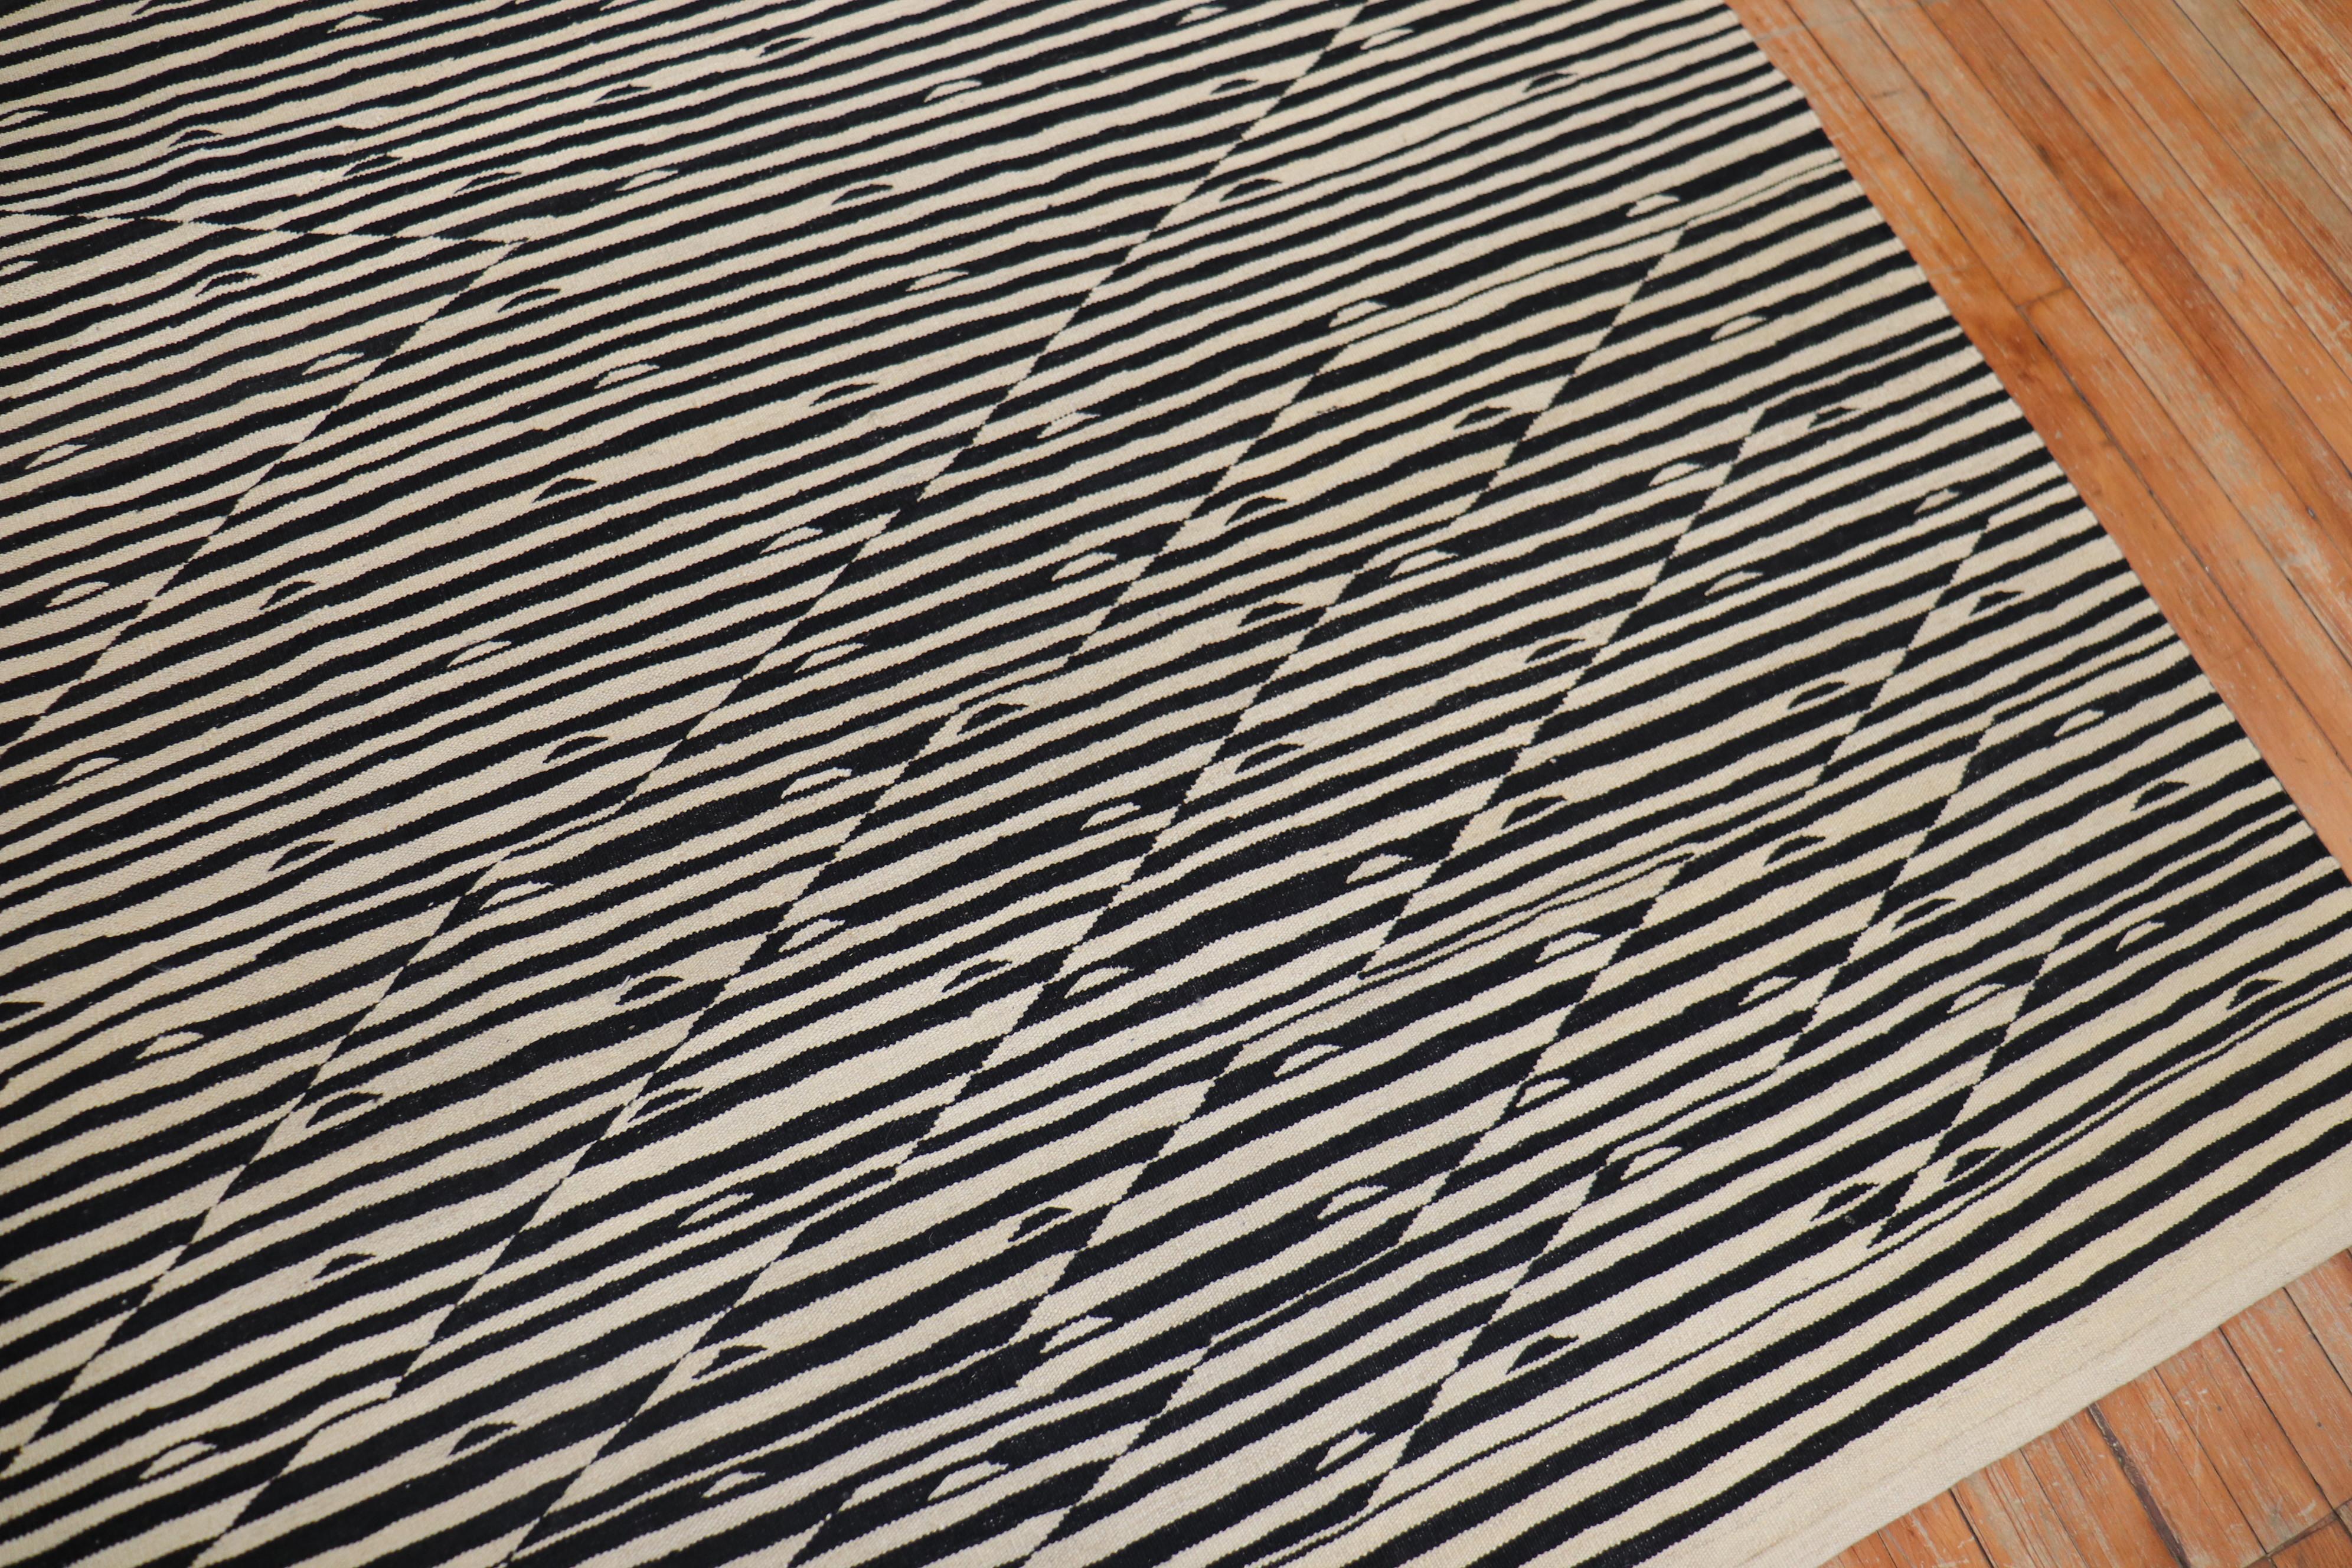 One of a kind modern Persian Kilim in black and white with a zebra-like motif

Measures: 8'6